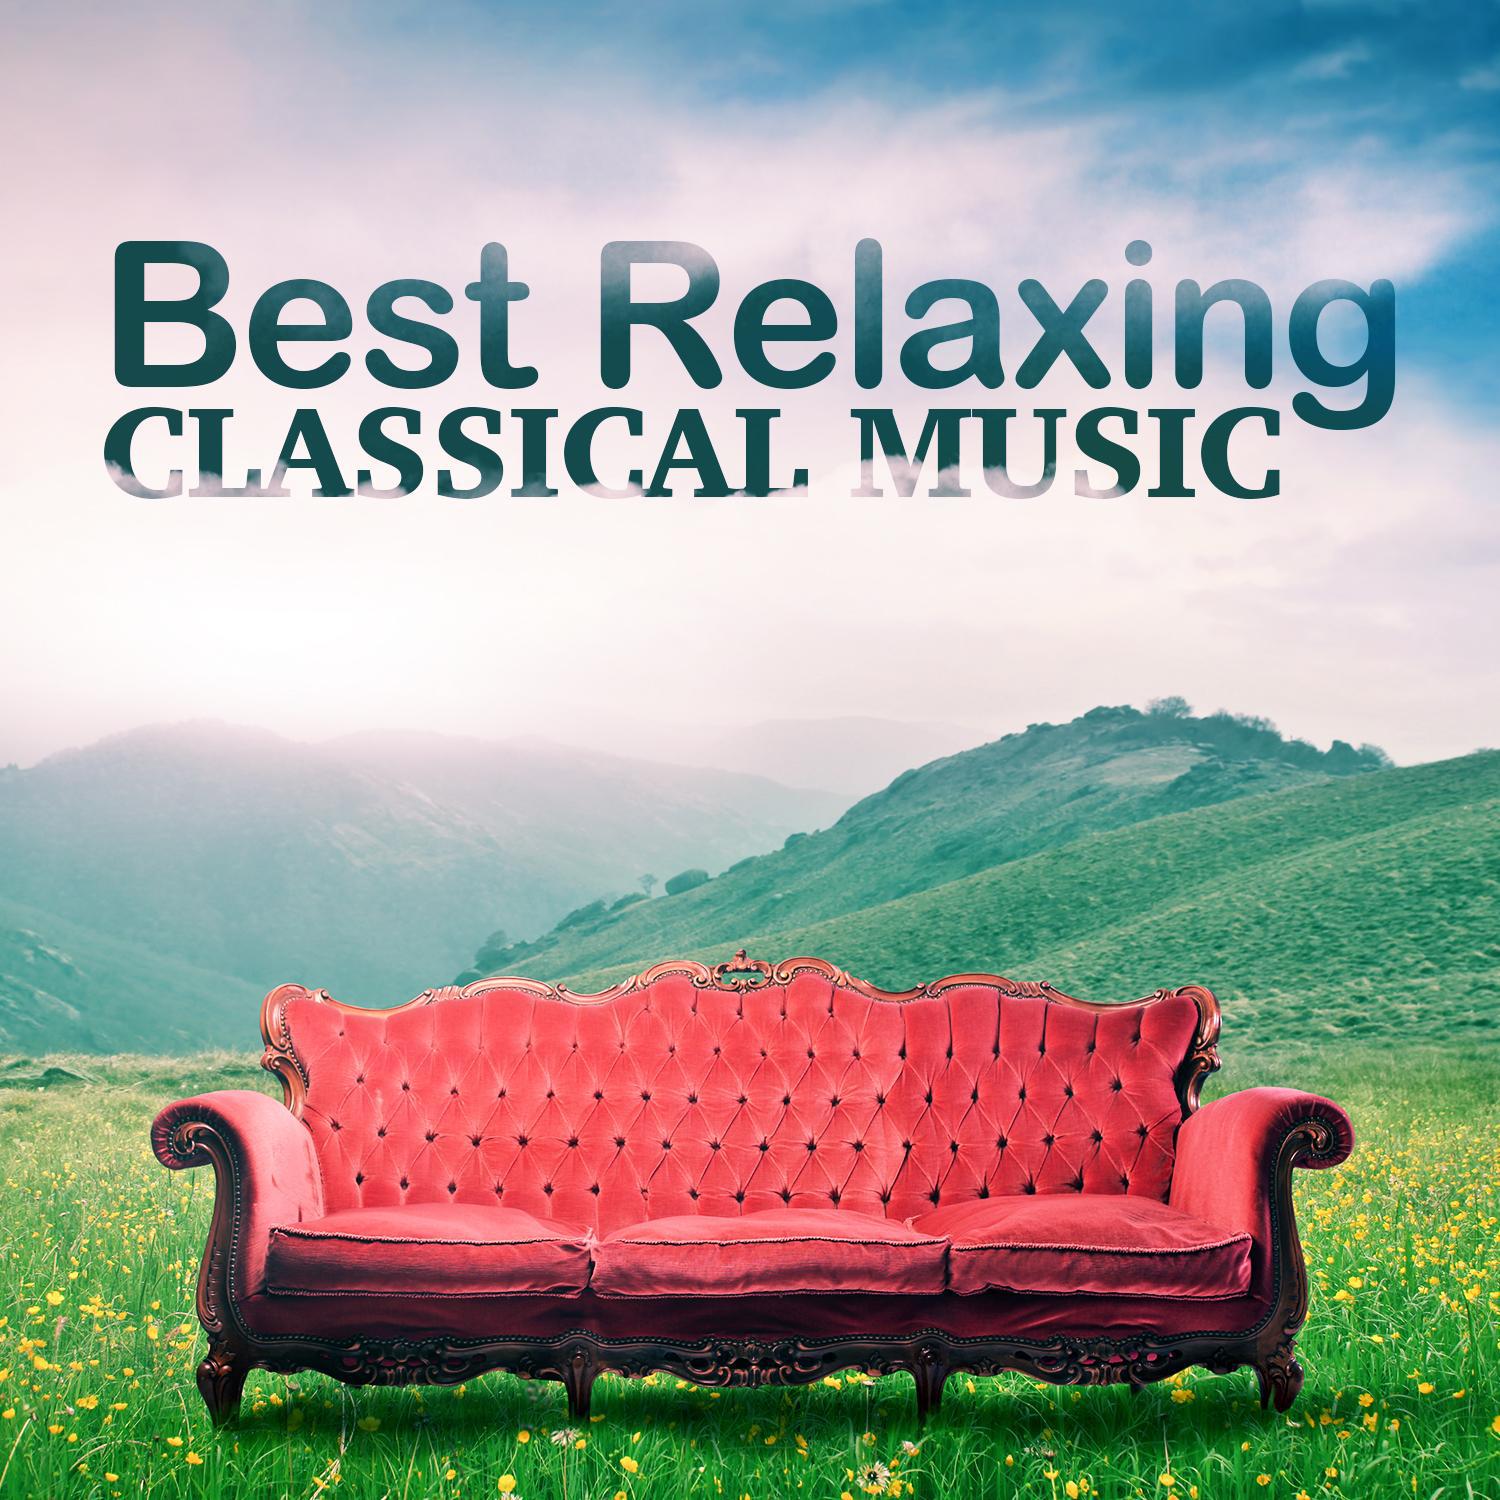 Best Relaxing Classical Music